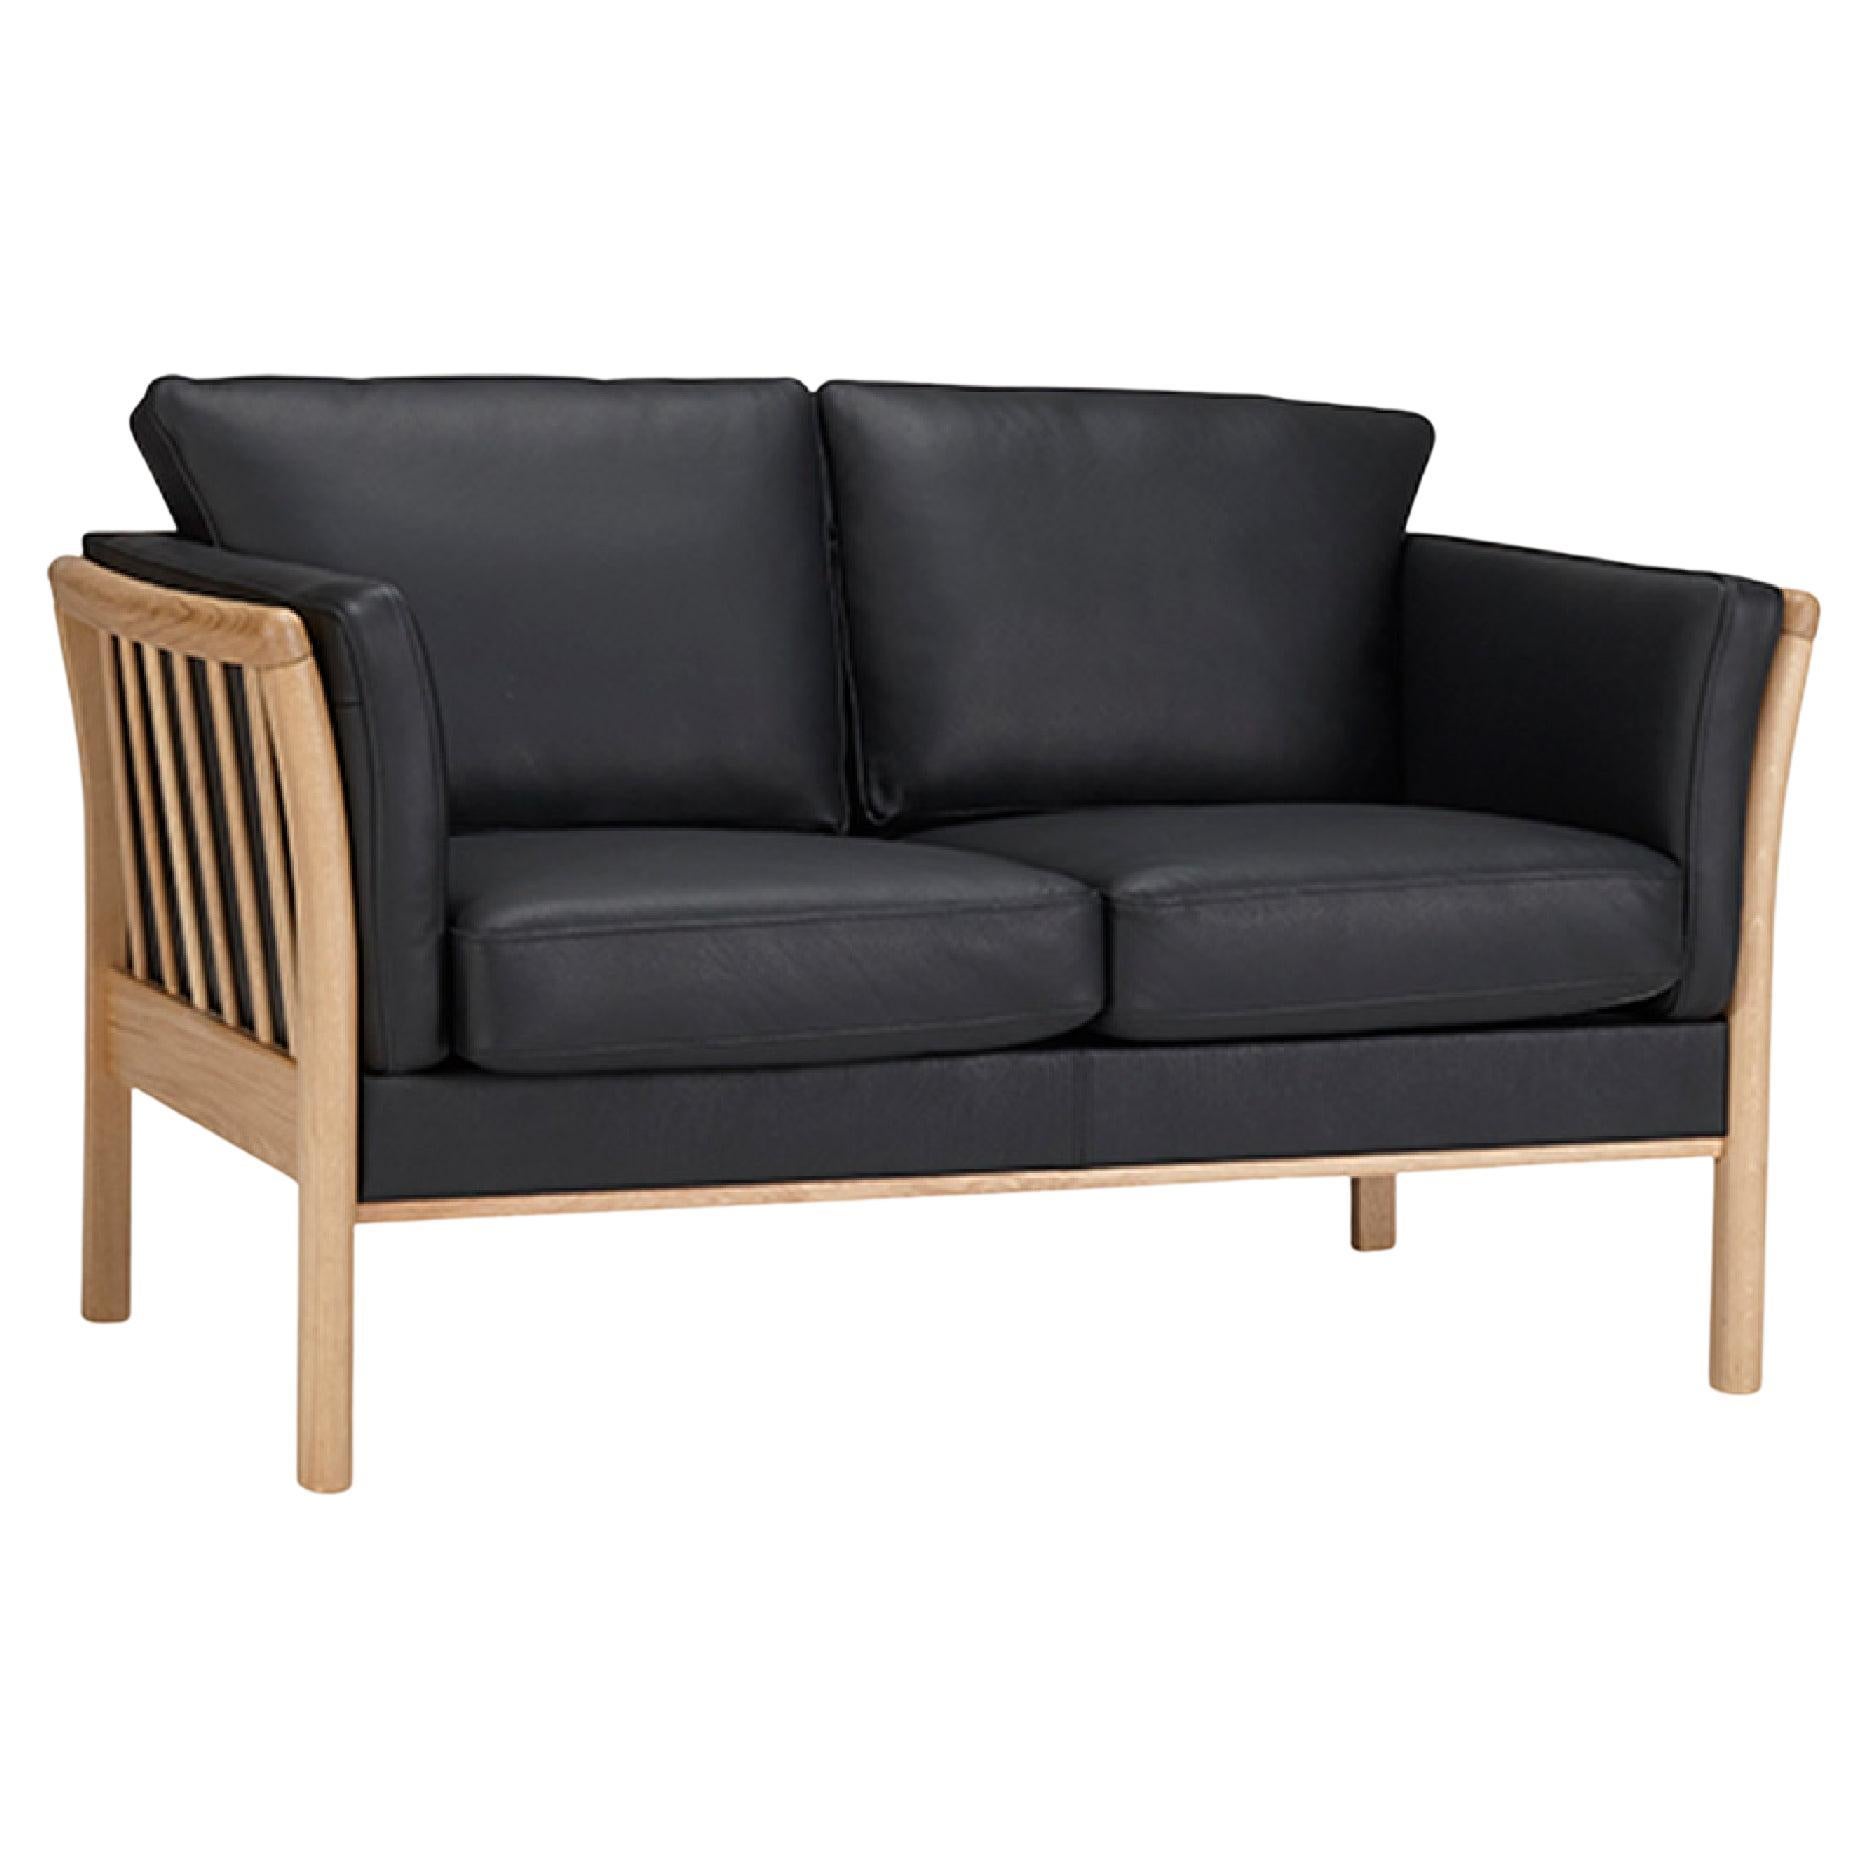  Hayche Oscar 2 Seater Sofa - Black Leather, UK, Made to Order